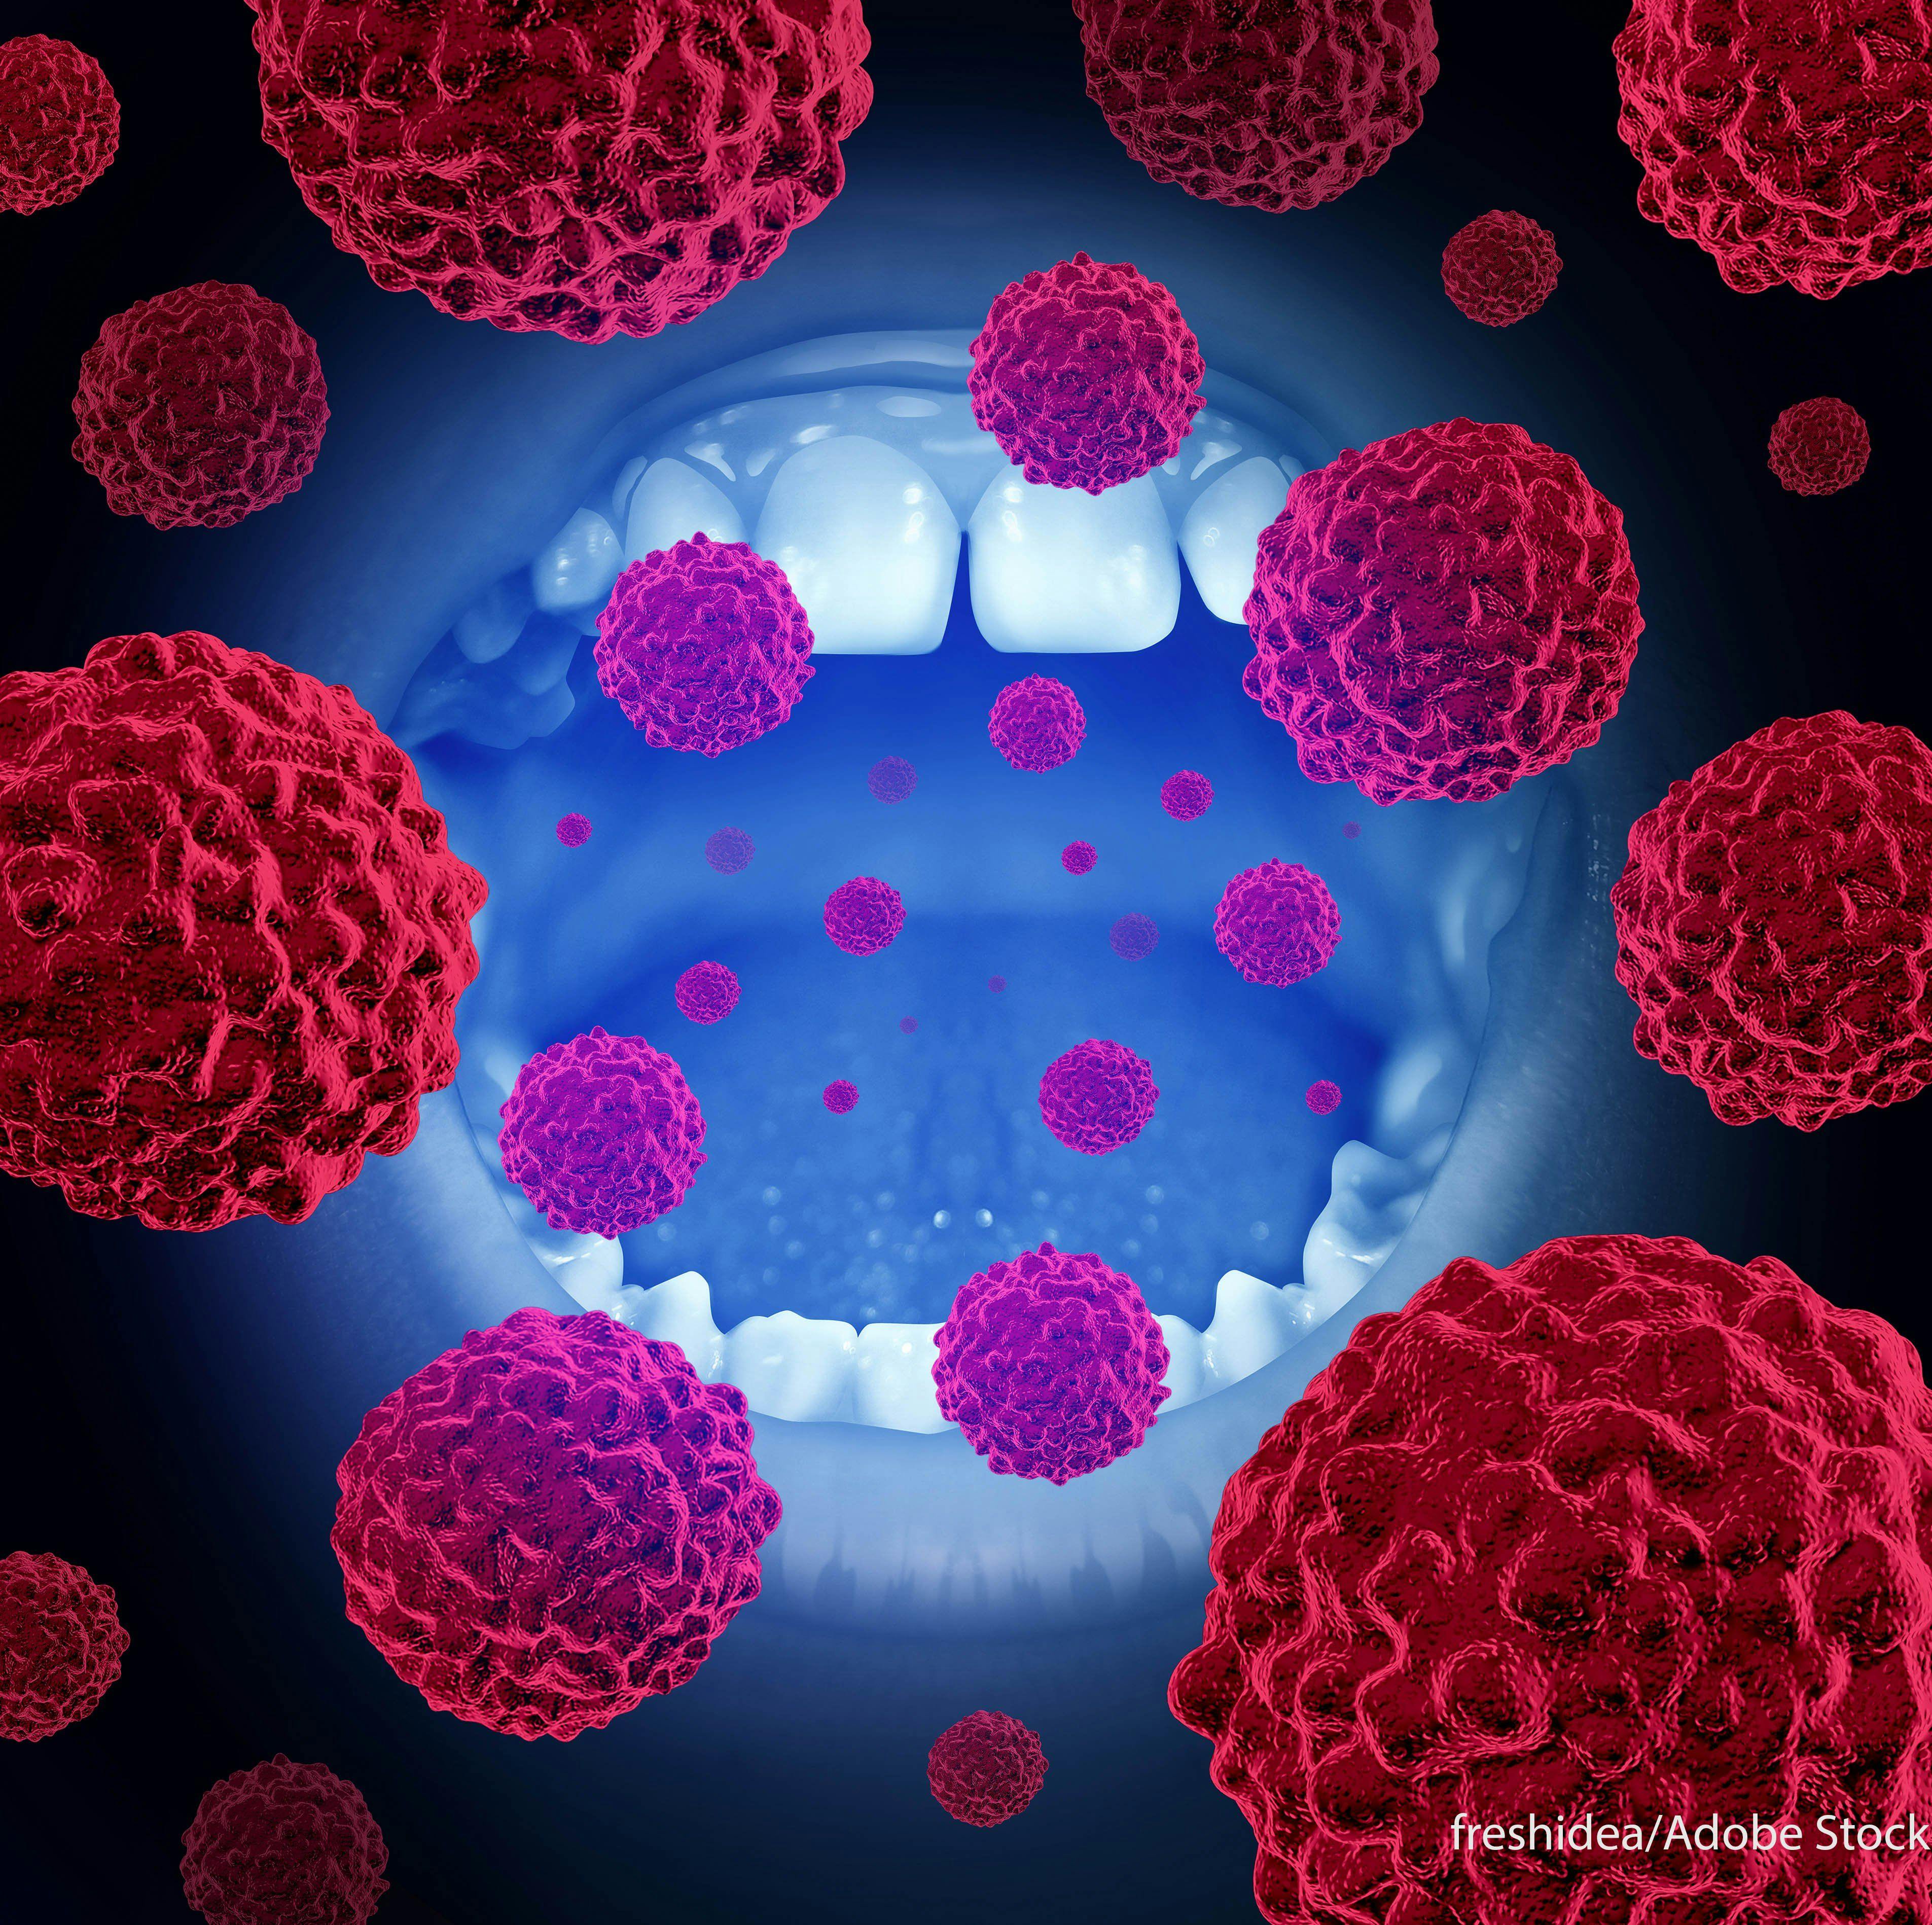 Should Surveillance Schedules Apply to HPV-Associated Oropharyngeal Squamous Cell Carcinomas?